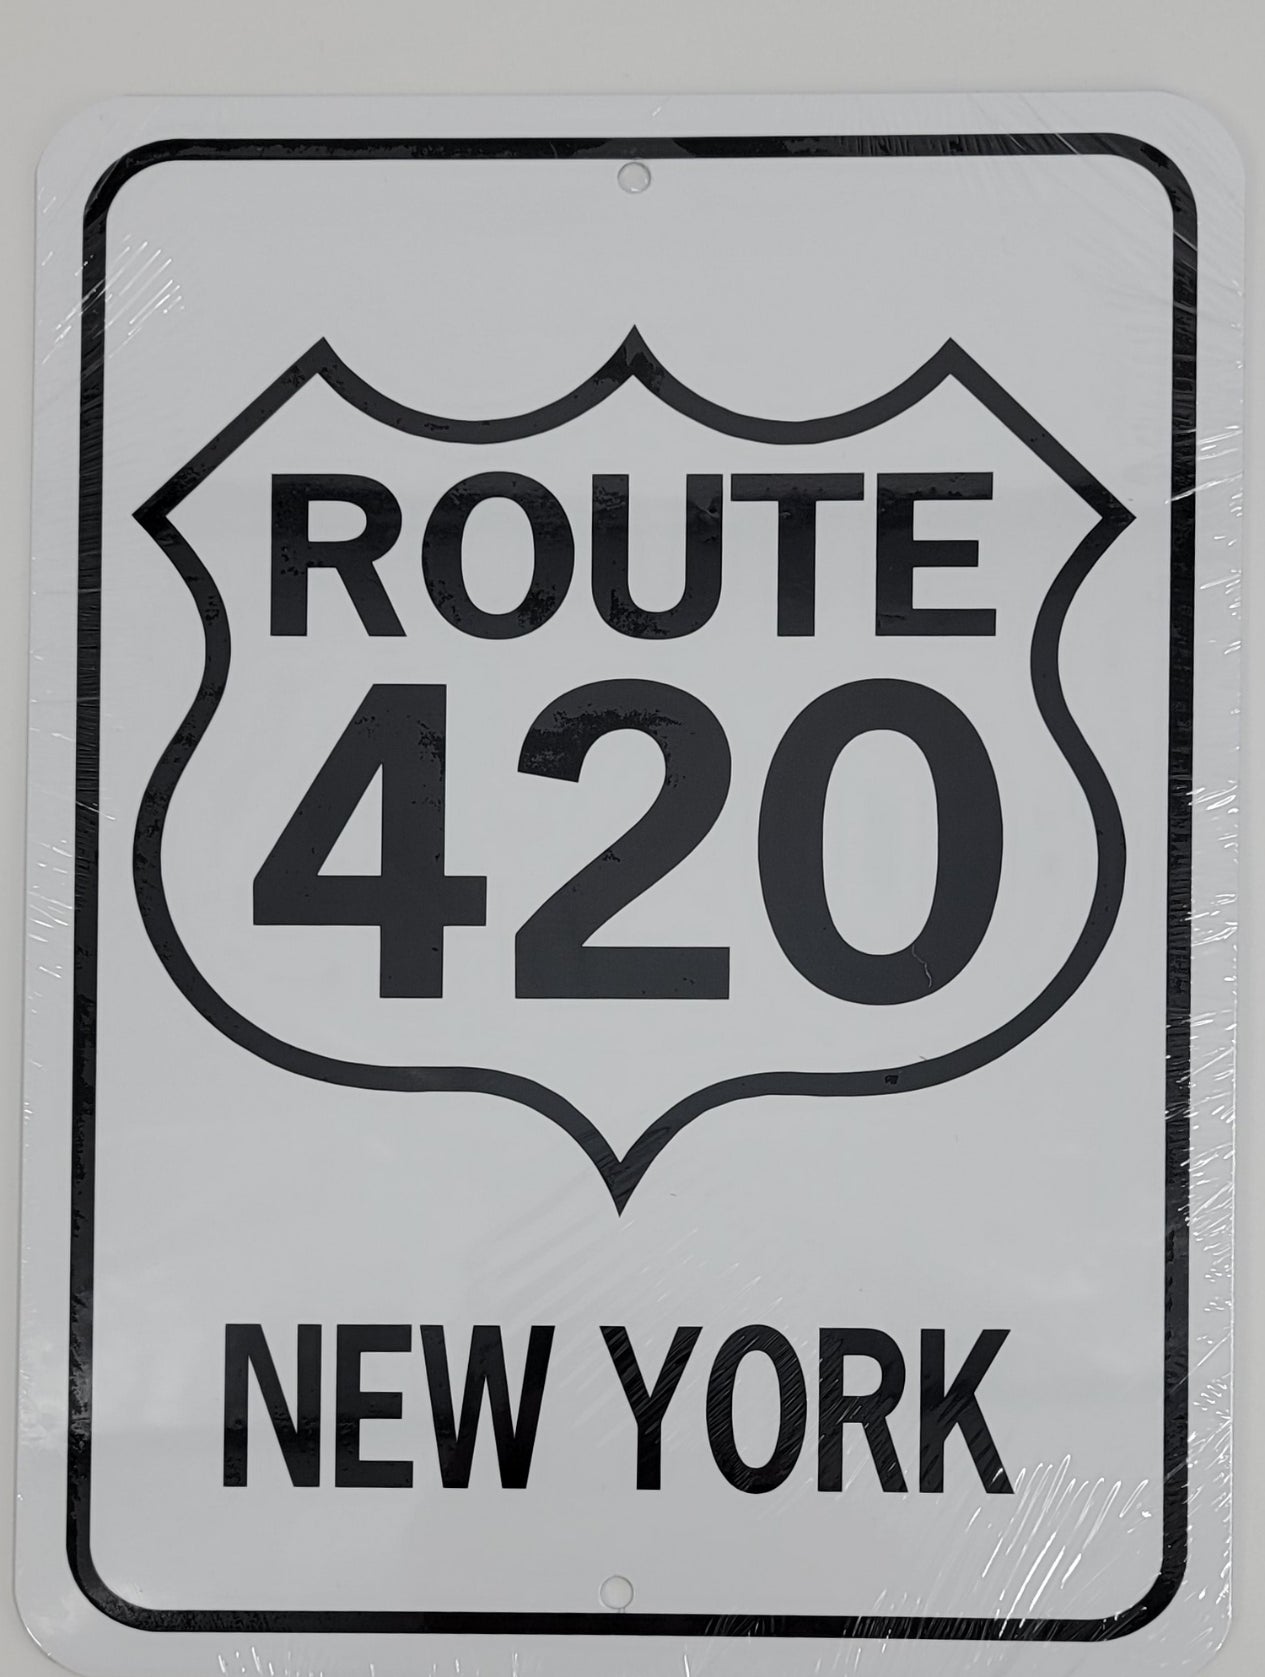 420 Themed Metal Signs - Assorted